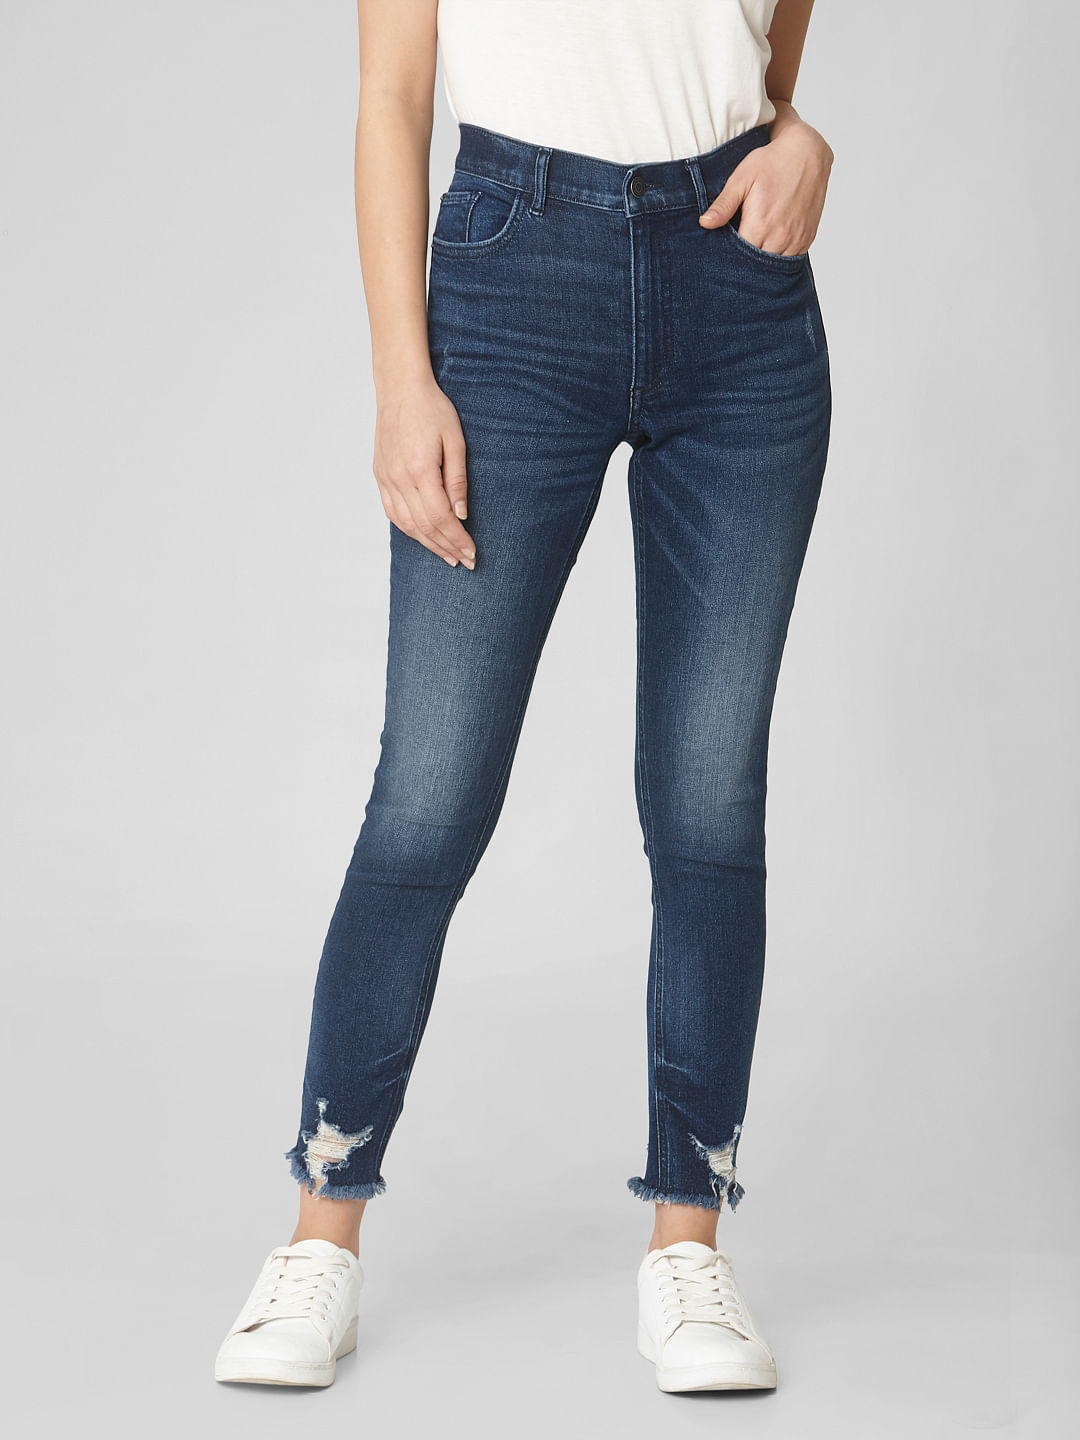 ripped ankle jeans womens